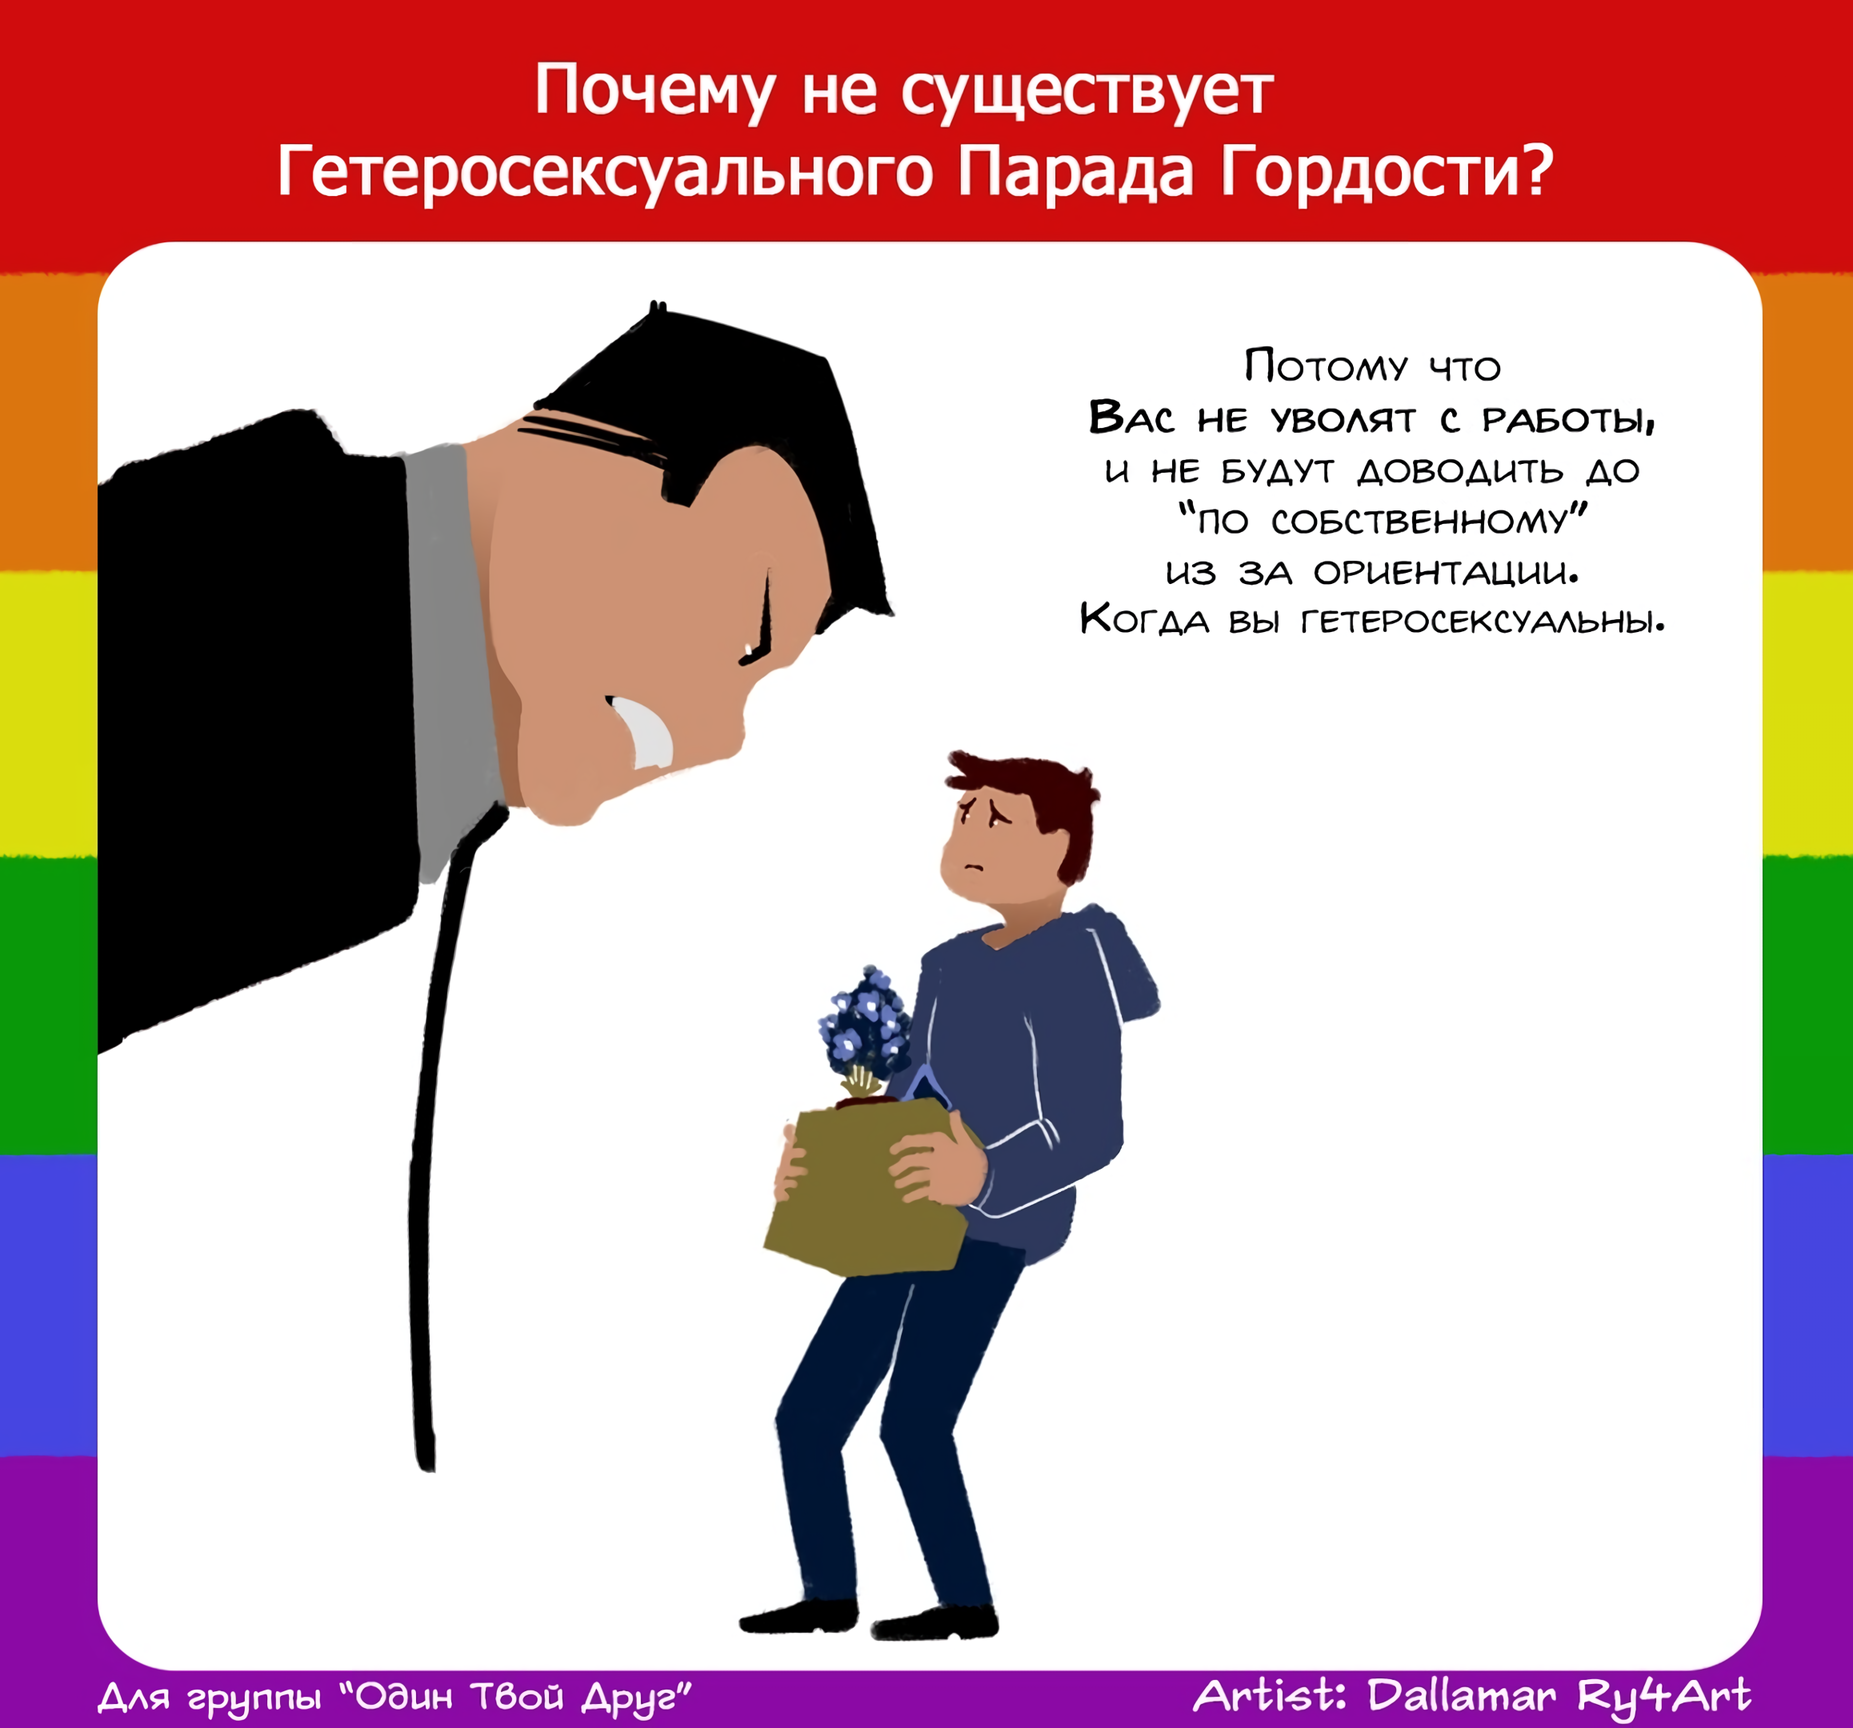 Why heterosexual pride parades are not needed - Comics, LGBT, Problem, Heterosexual, Why?, Does not exist, Parade, Longpost